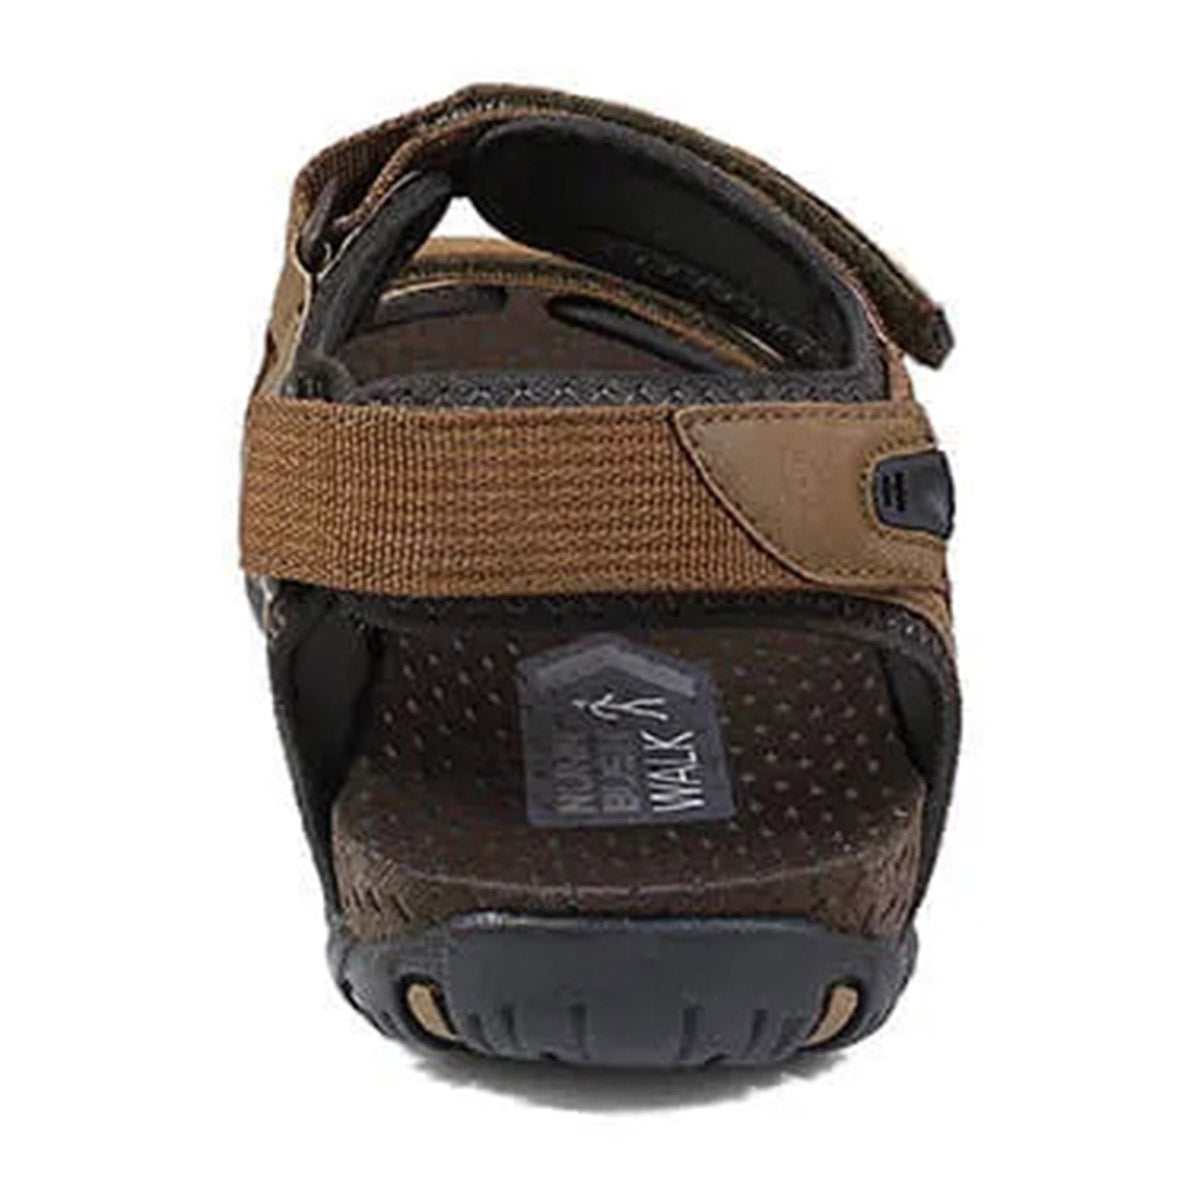 Brown Nunn Bush Rio Bravo 3 Strap sandals with closed toe and adjustable strap, featuring a lightweight rubber outsole.